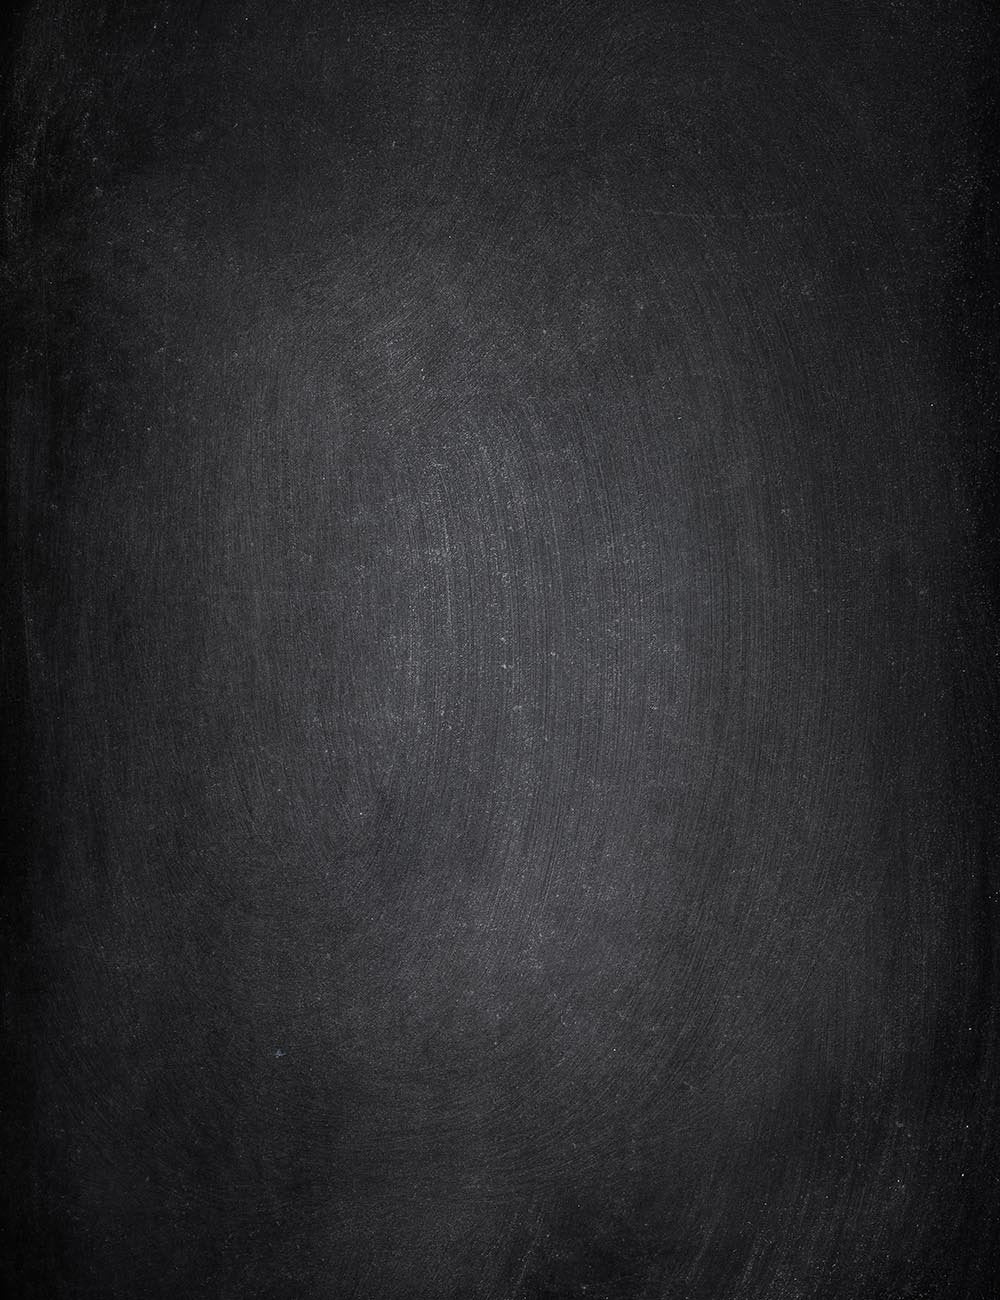 Black Chalkboard With Texture Backdrop For Photography J-0687 Shopbackdrop